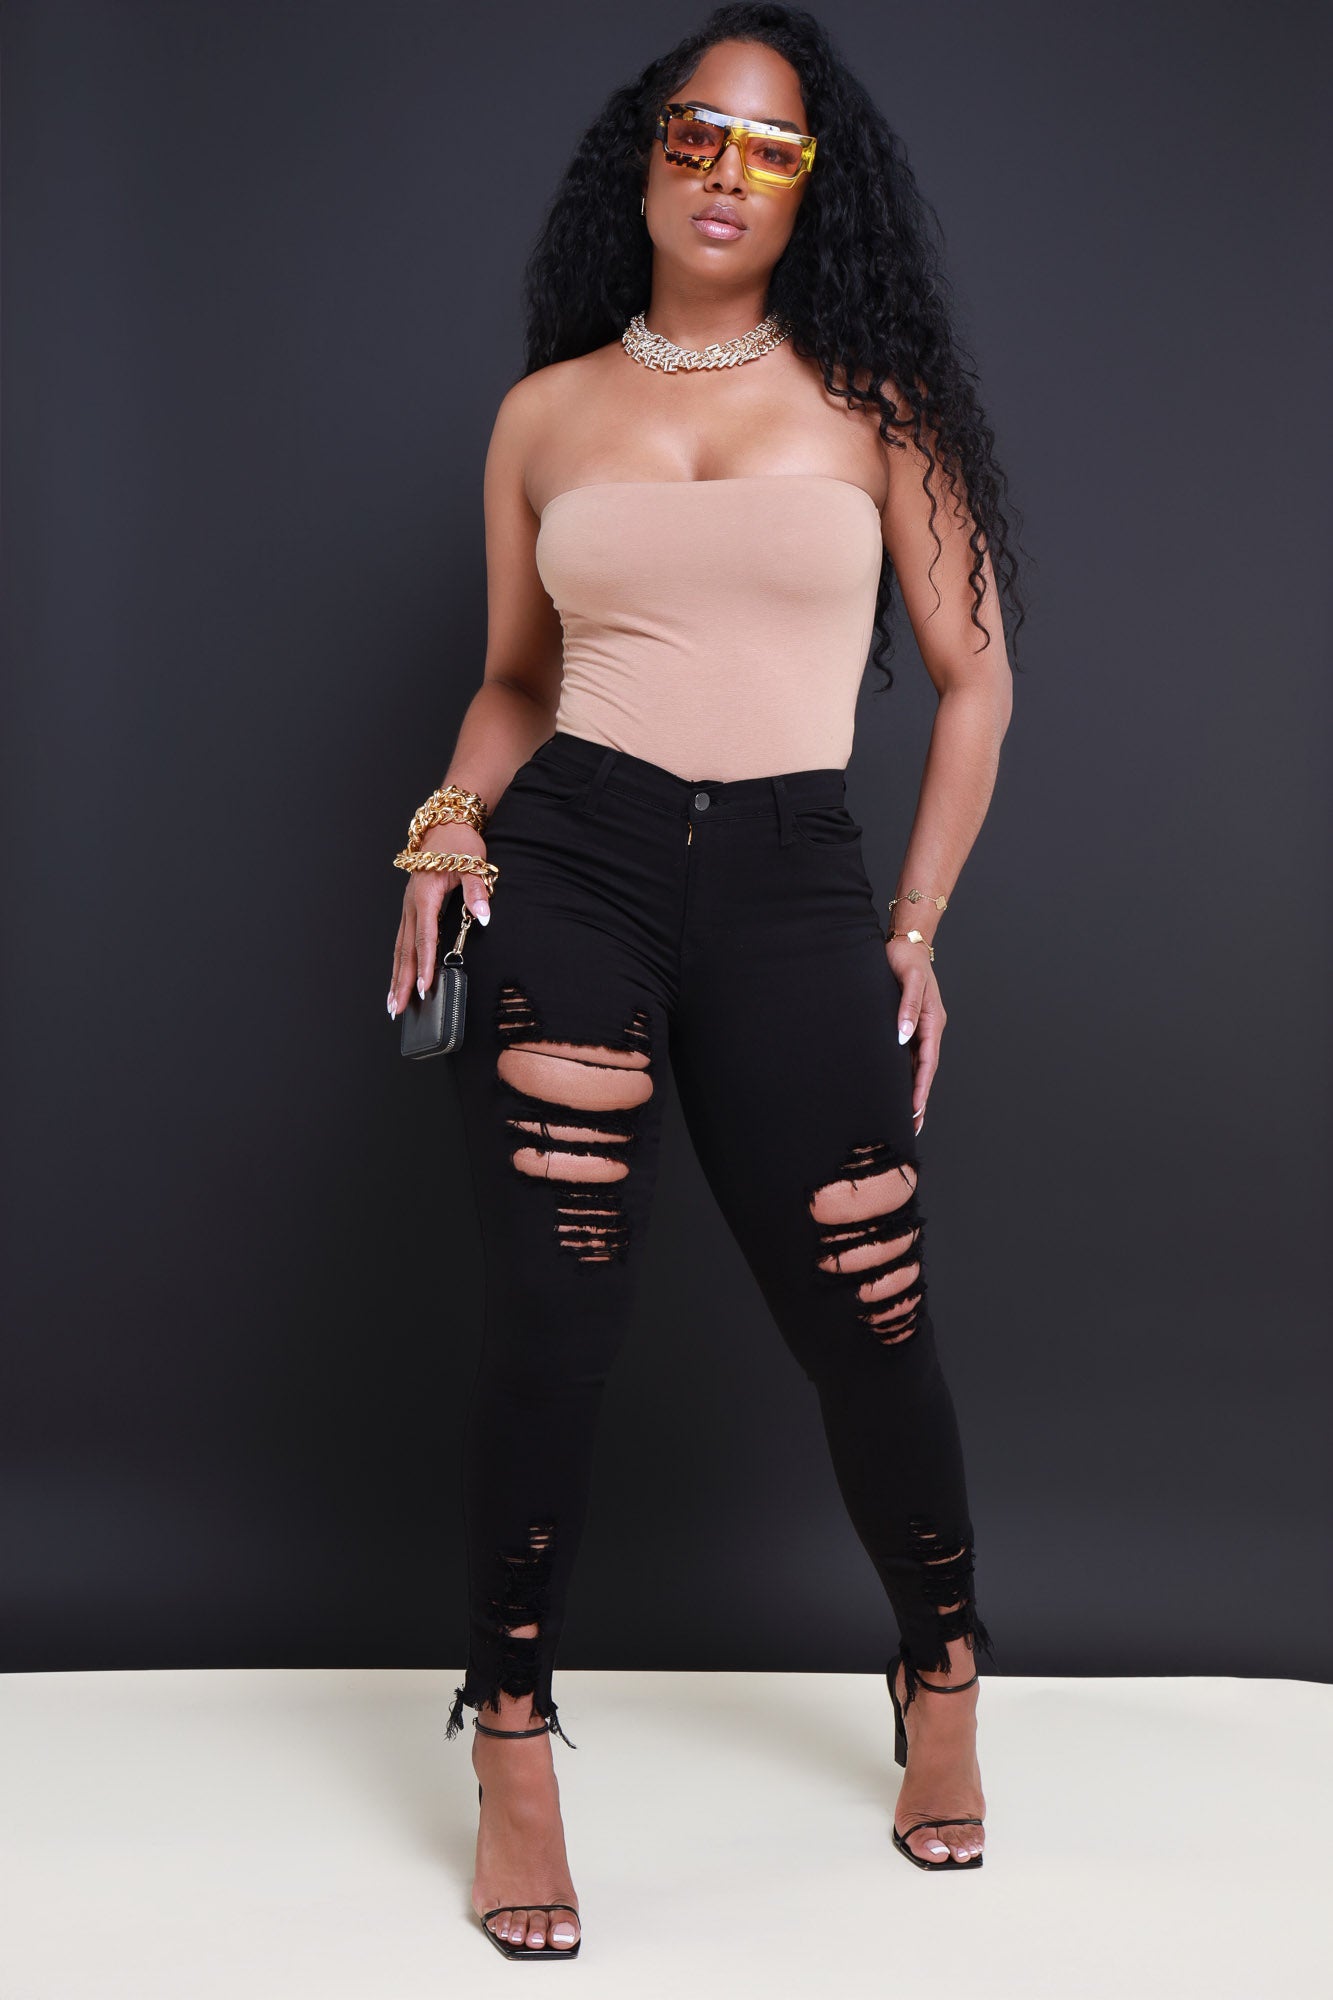 All The Booty Ripped Skinny Jeans - Black, Fashion Nova, Jeans